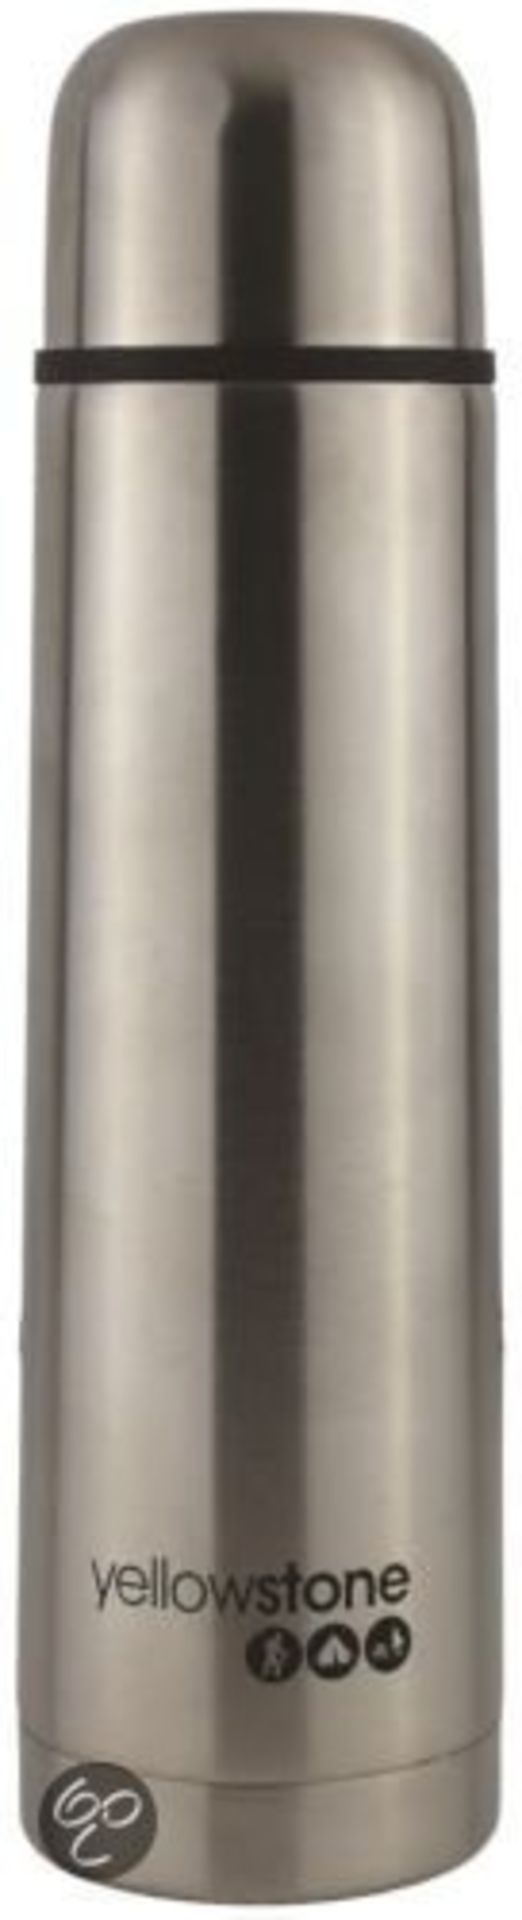 V Brand New 500ml Stainless Steel Flask X 2 YOUR BID PRICE TO BE MULTIPLIED BY TWO